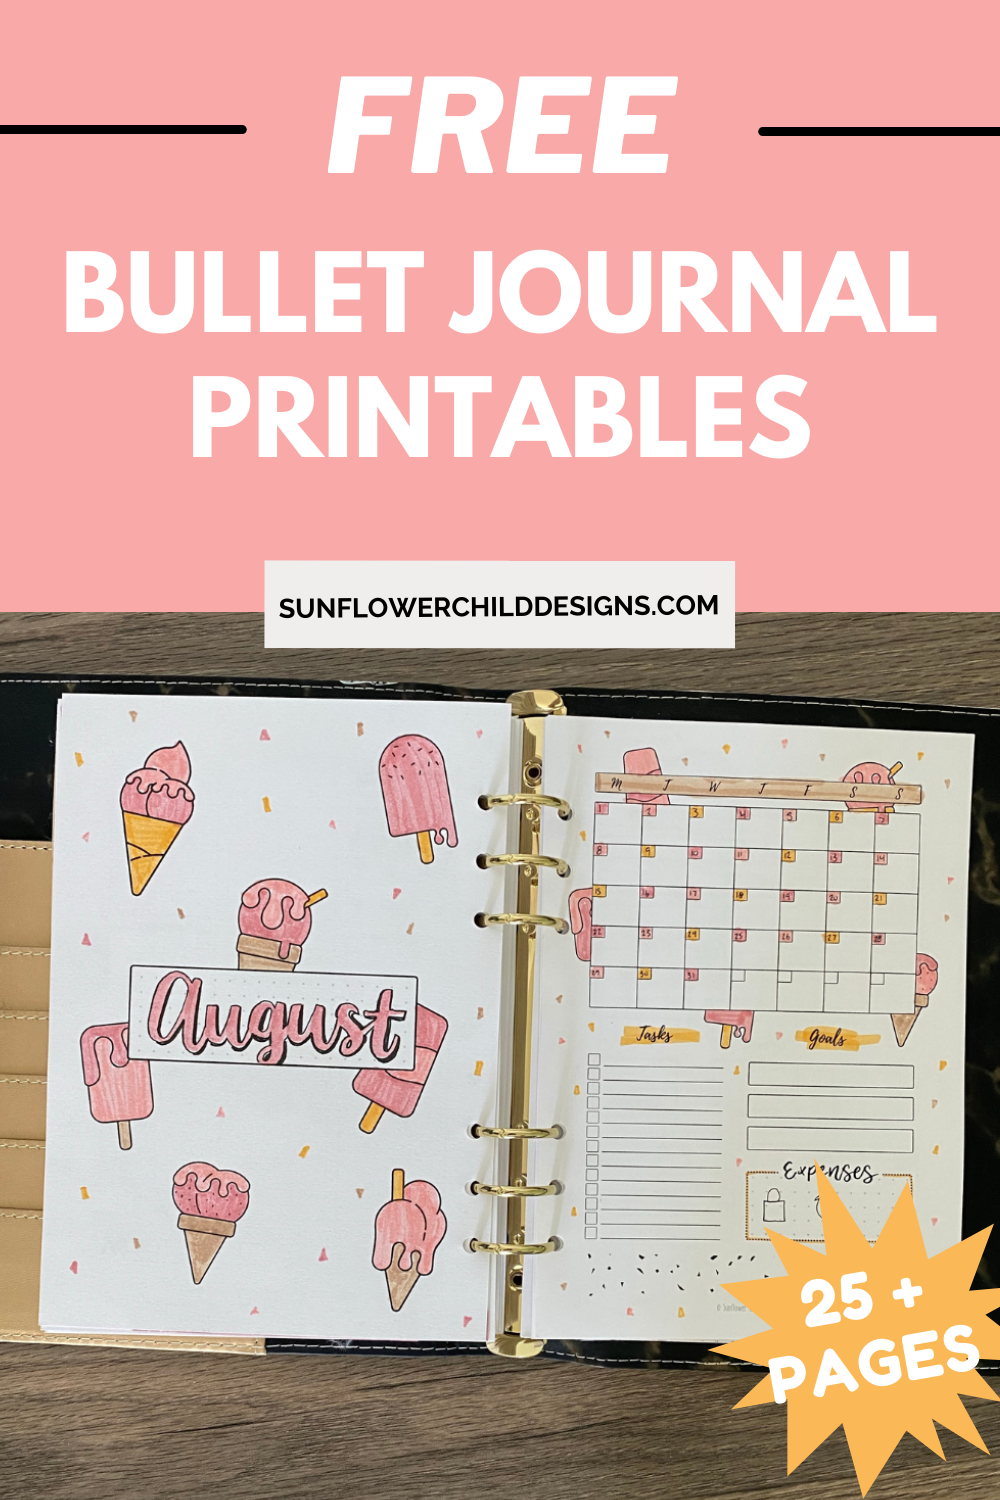 Free Bullet Journal Printables 25+ Pages with Doodles — Sunflower